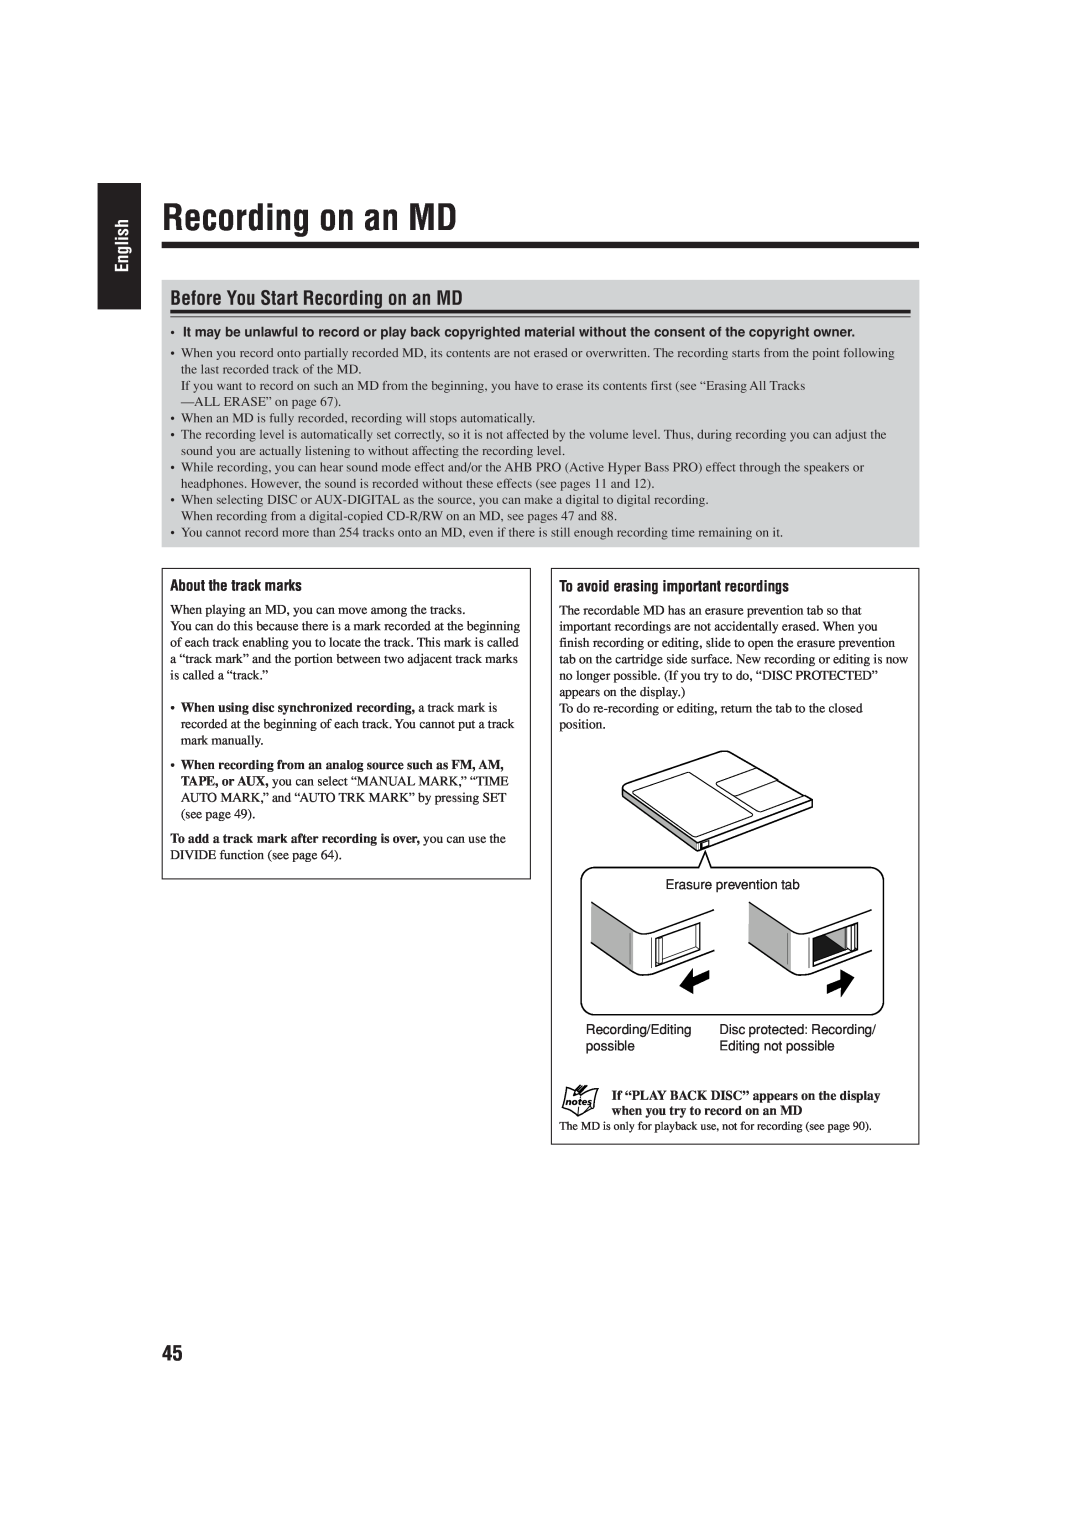 JVC UX-J99DVD manual Before You Start Recording on an MD, English, About the track marks 